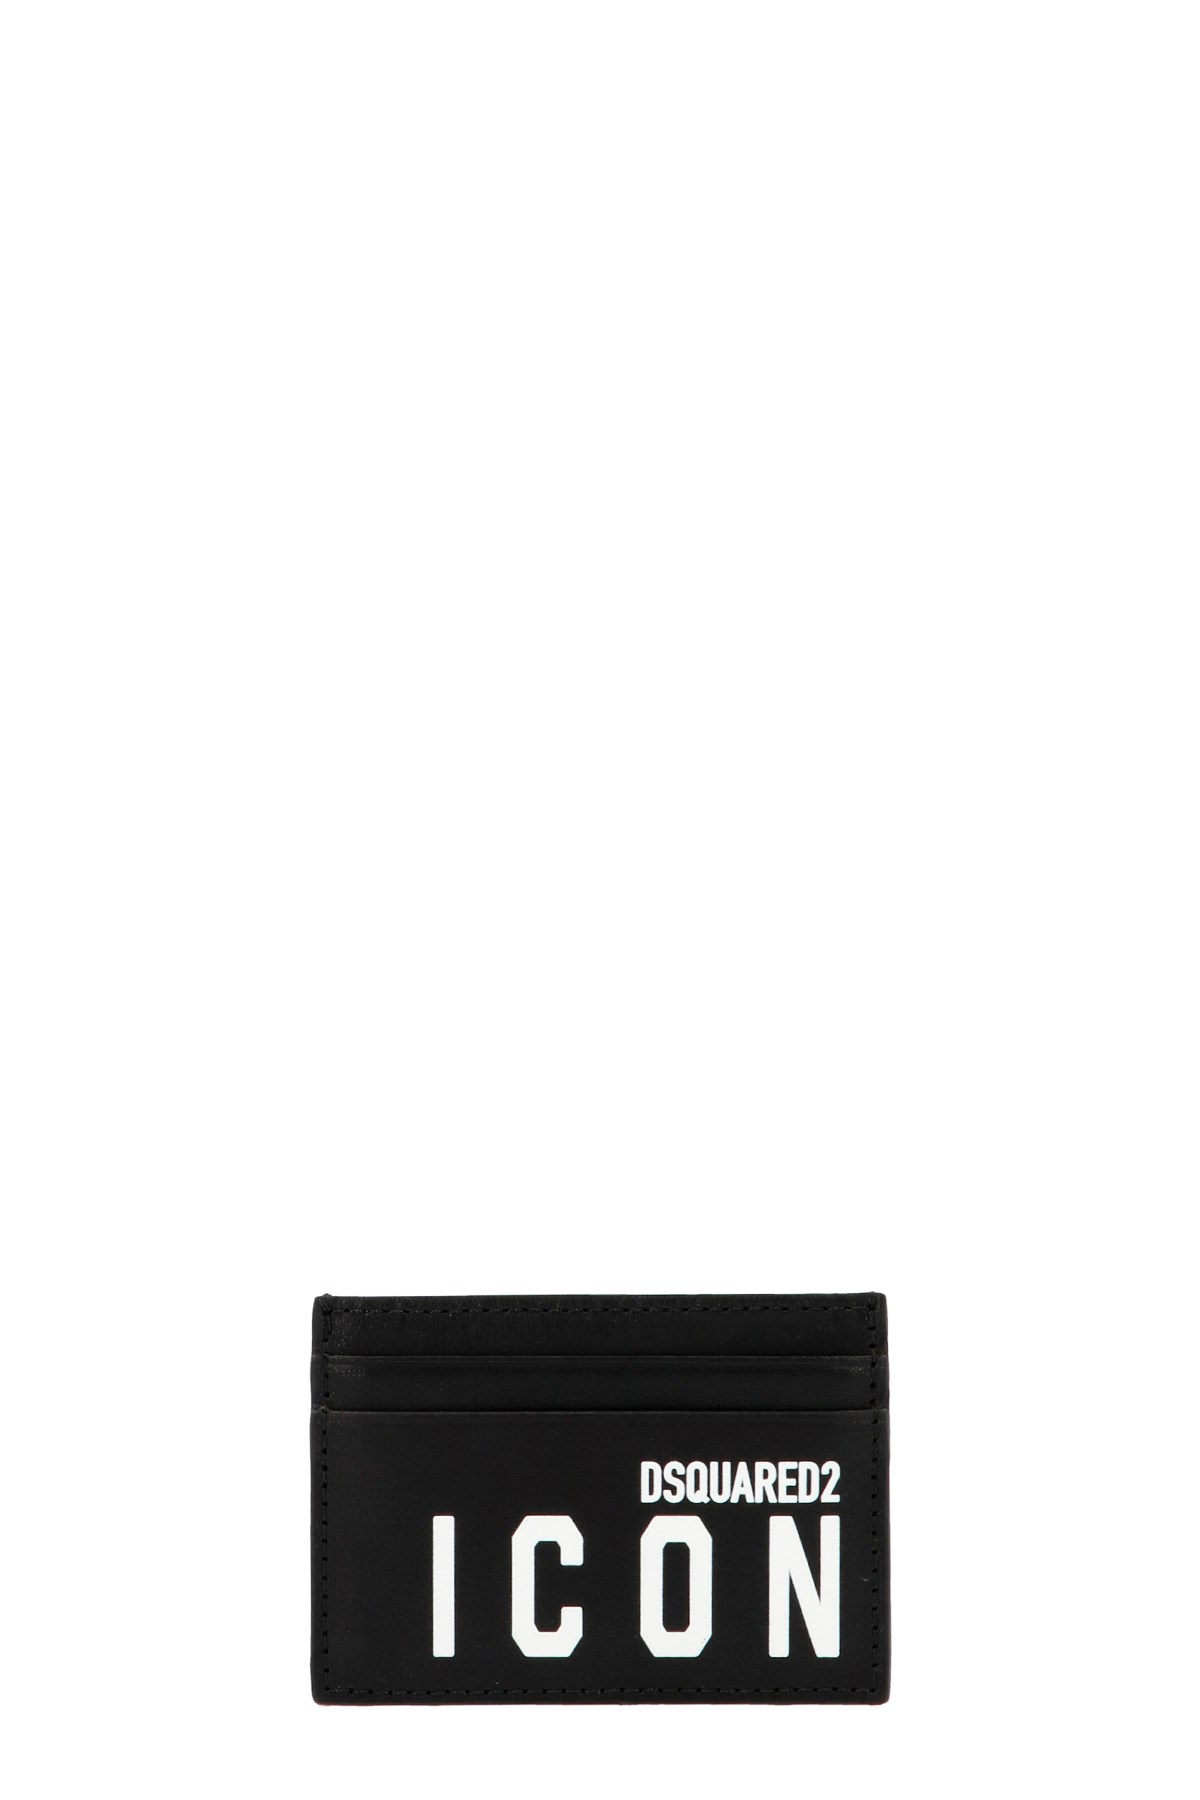 DSQUARED2 'Icon’ Card Holder